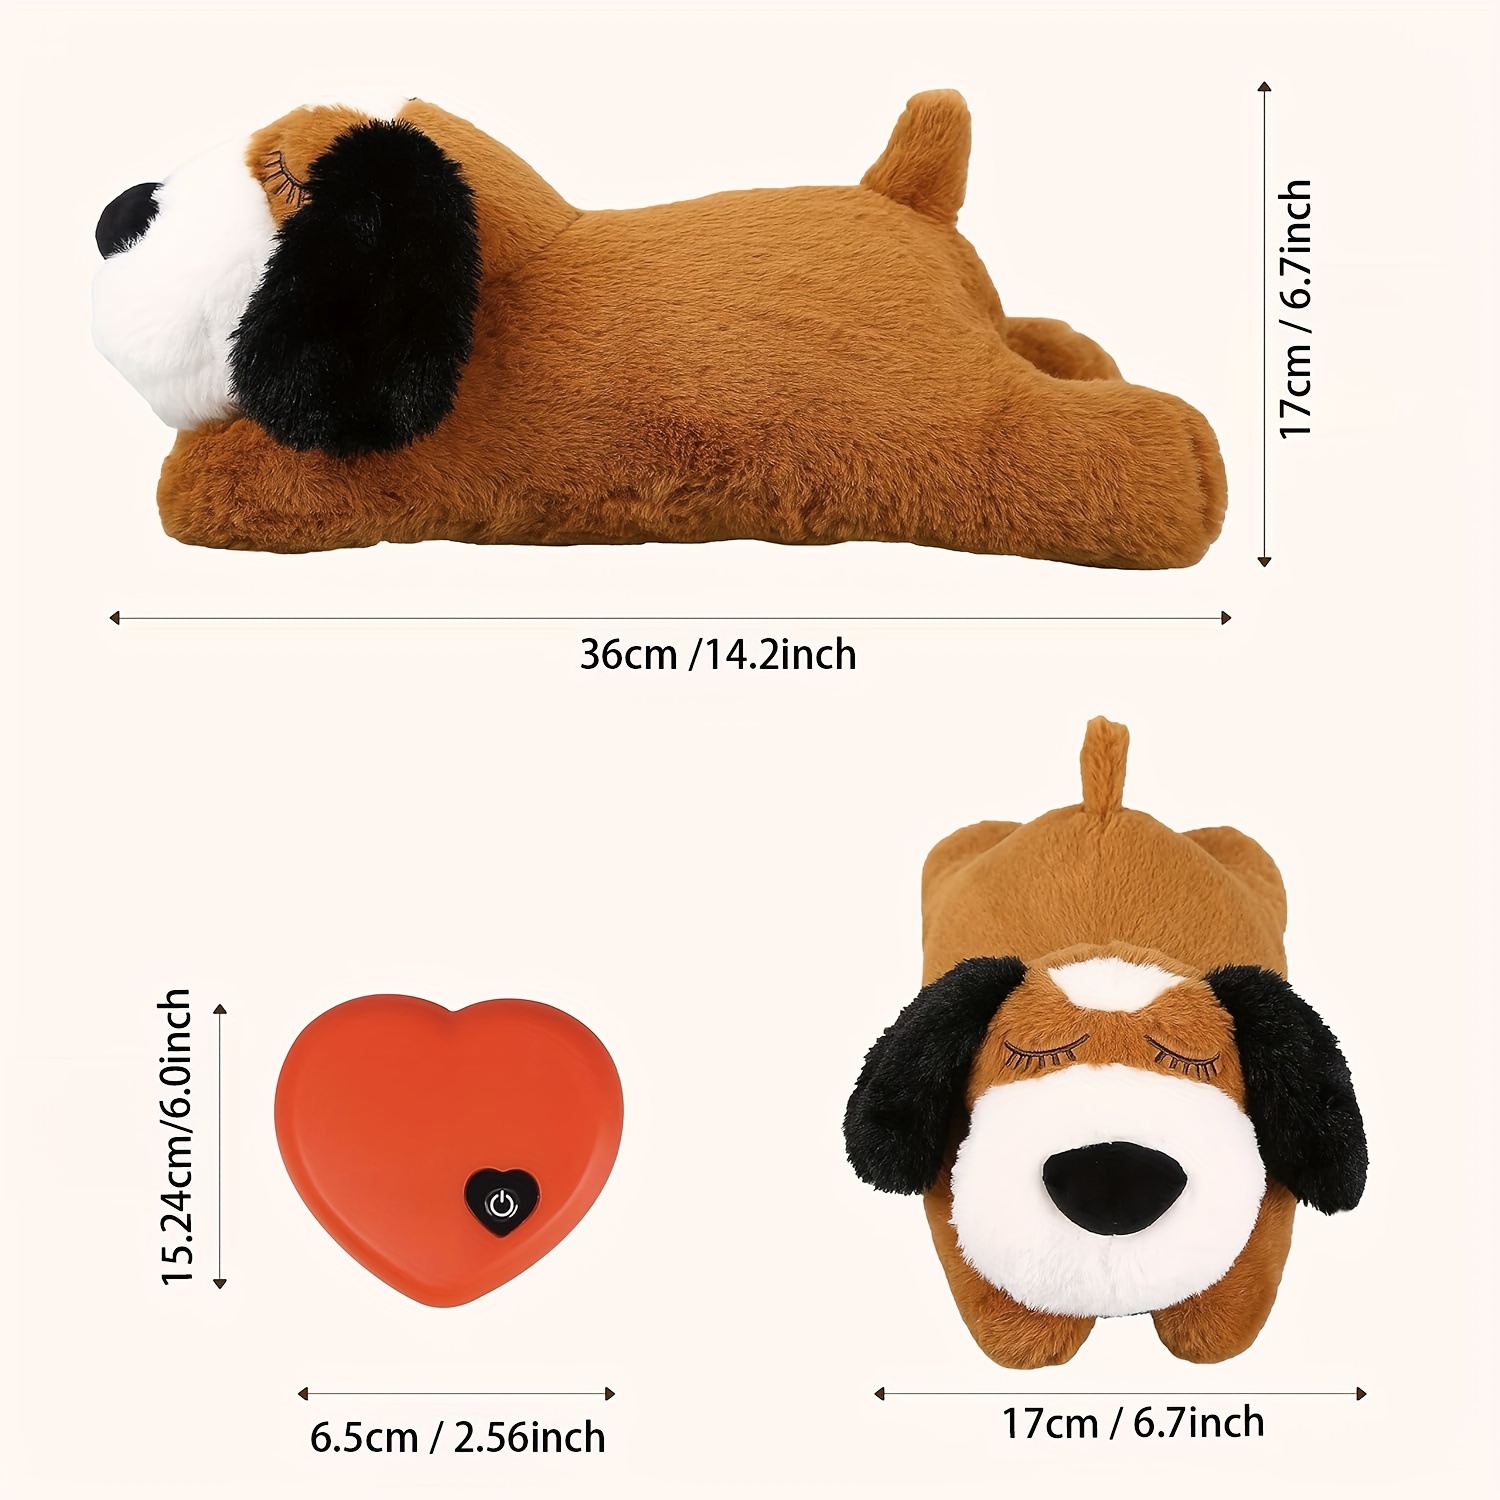  Anxiety Hound Dog Heartbeat Toy - Anxiety Relief Toys for Dogs,  Separation Anxiety Toys for Dogs - Stuffed Animal with Heartbeat - Dog  Anxiety Relief Toy - Dog Separation Aid : Pet Supplies